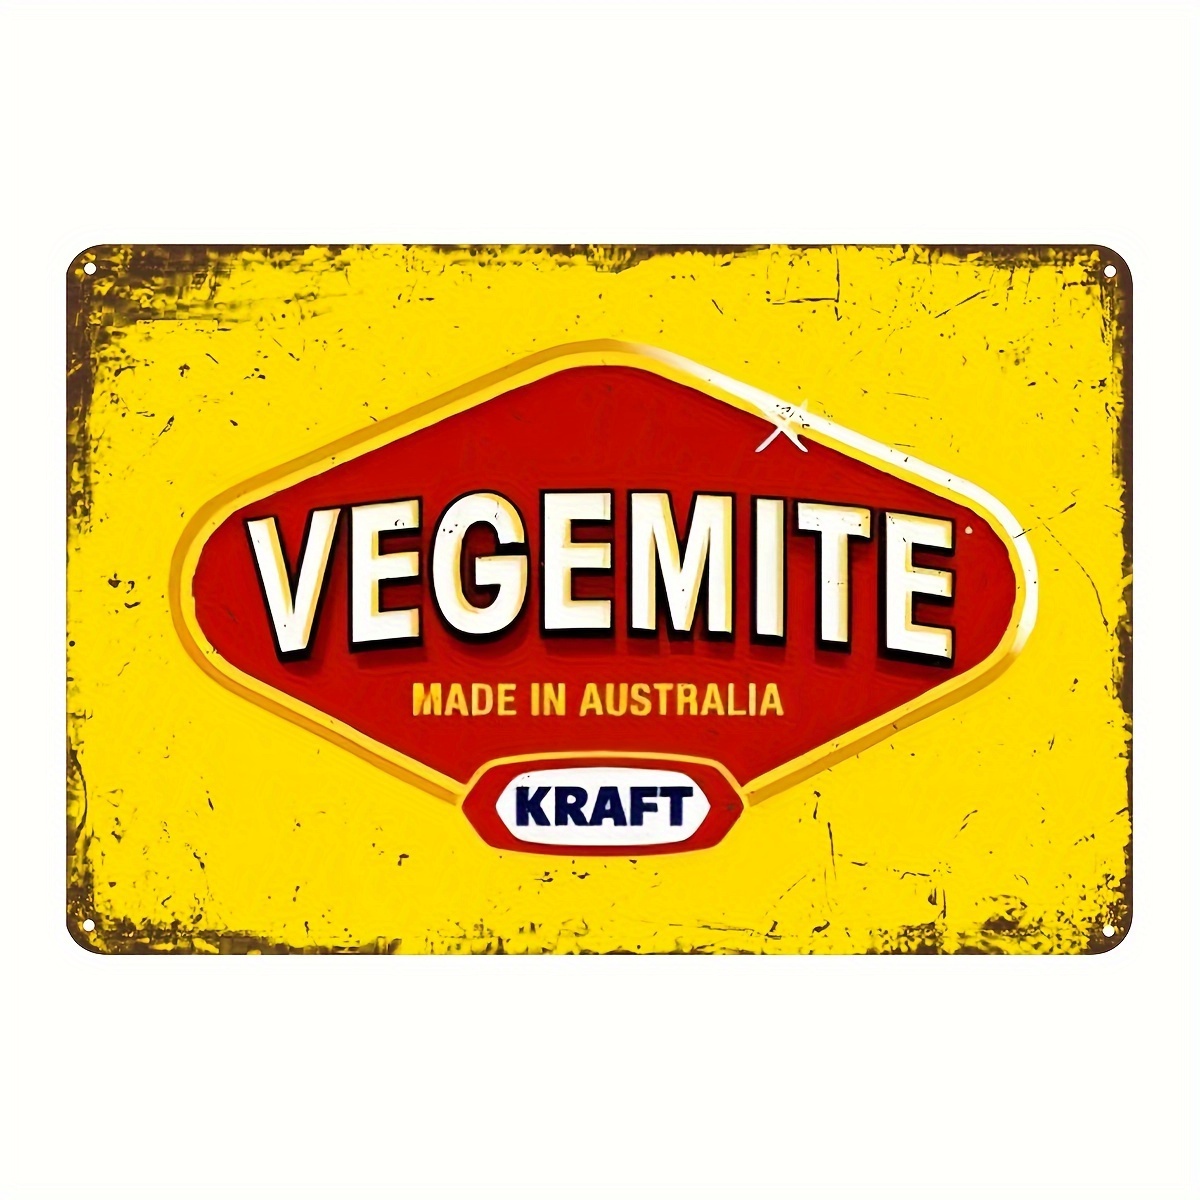 

Vegemite Kraft Brand Vintage Tin Sign - 1 Piece, Iron Material, Pre-drilled Wall Art For Home, Kitchen, And Bar Decor - Australian Made Retro Collectible Plaque (8"x12")